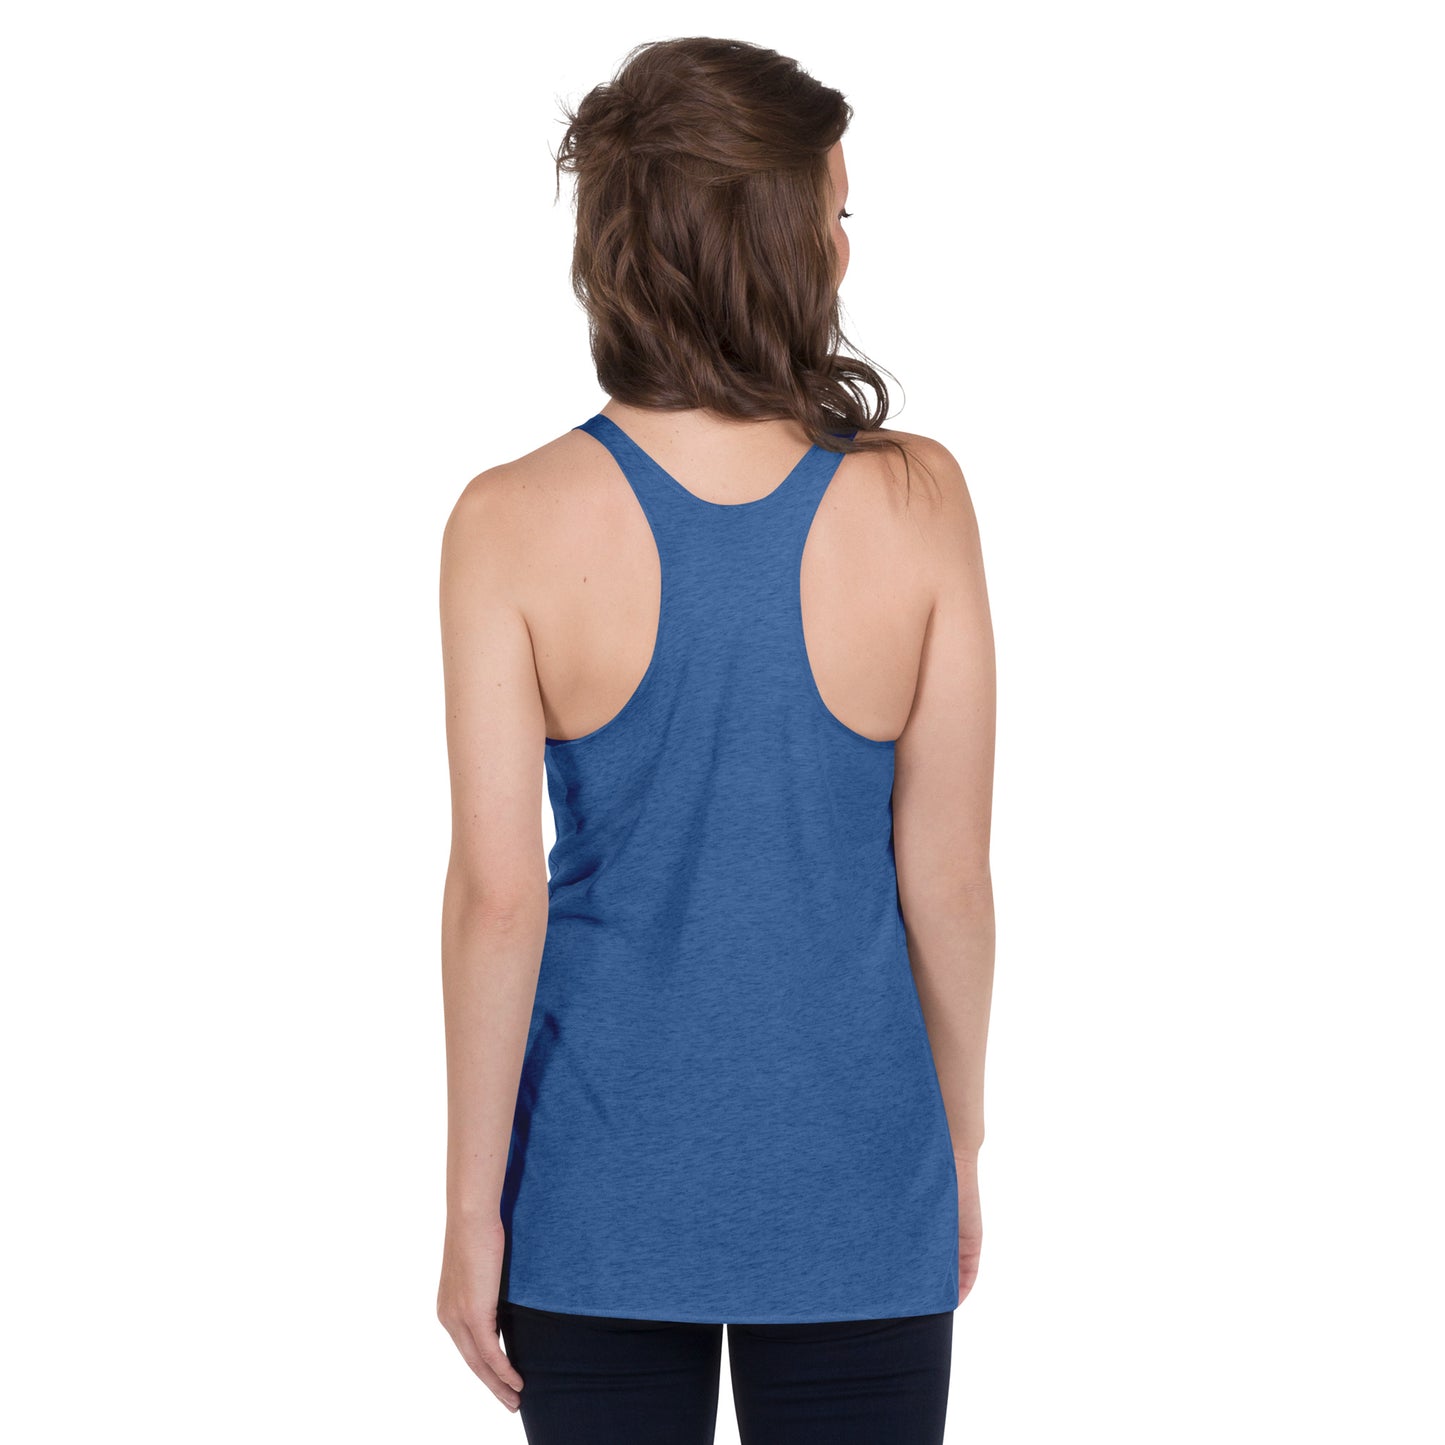 "Ginger Whiskey" Ladies' Racerback Tank (The Guild Codex)